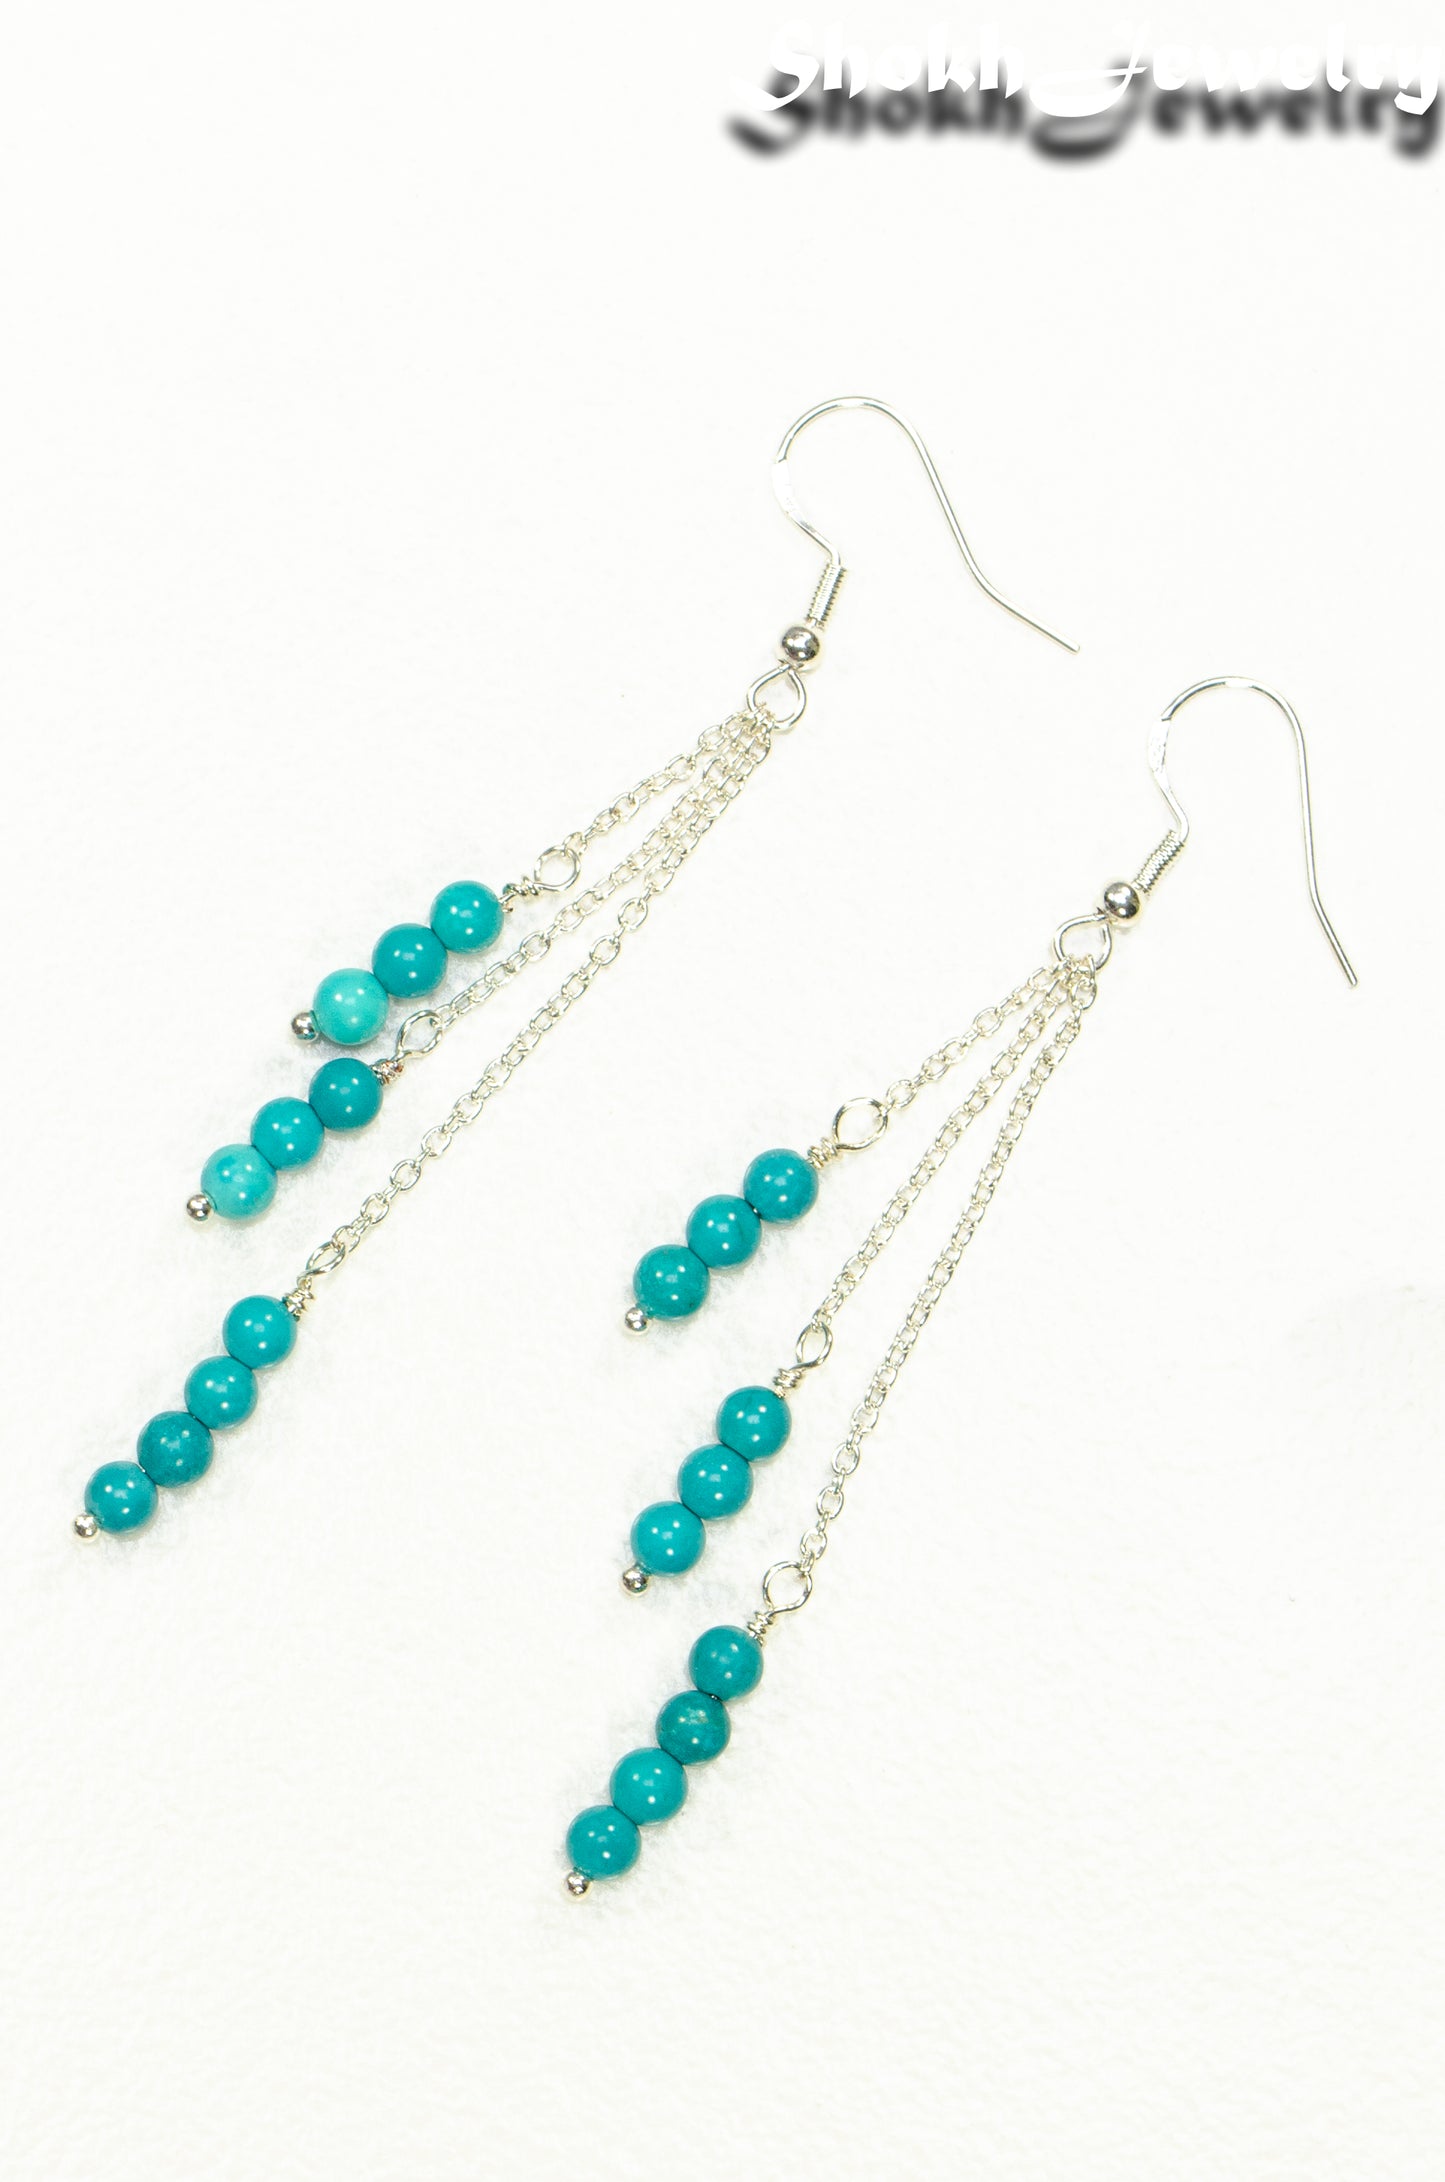 Top view of Silver Plated Chain and Turquoise Earrings.